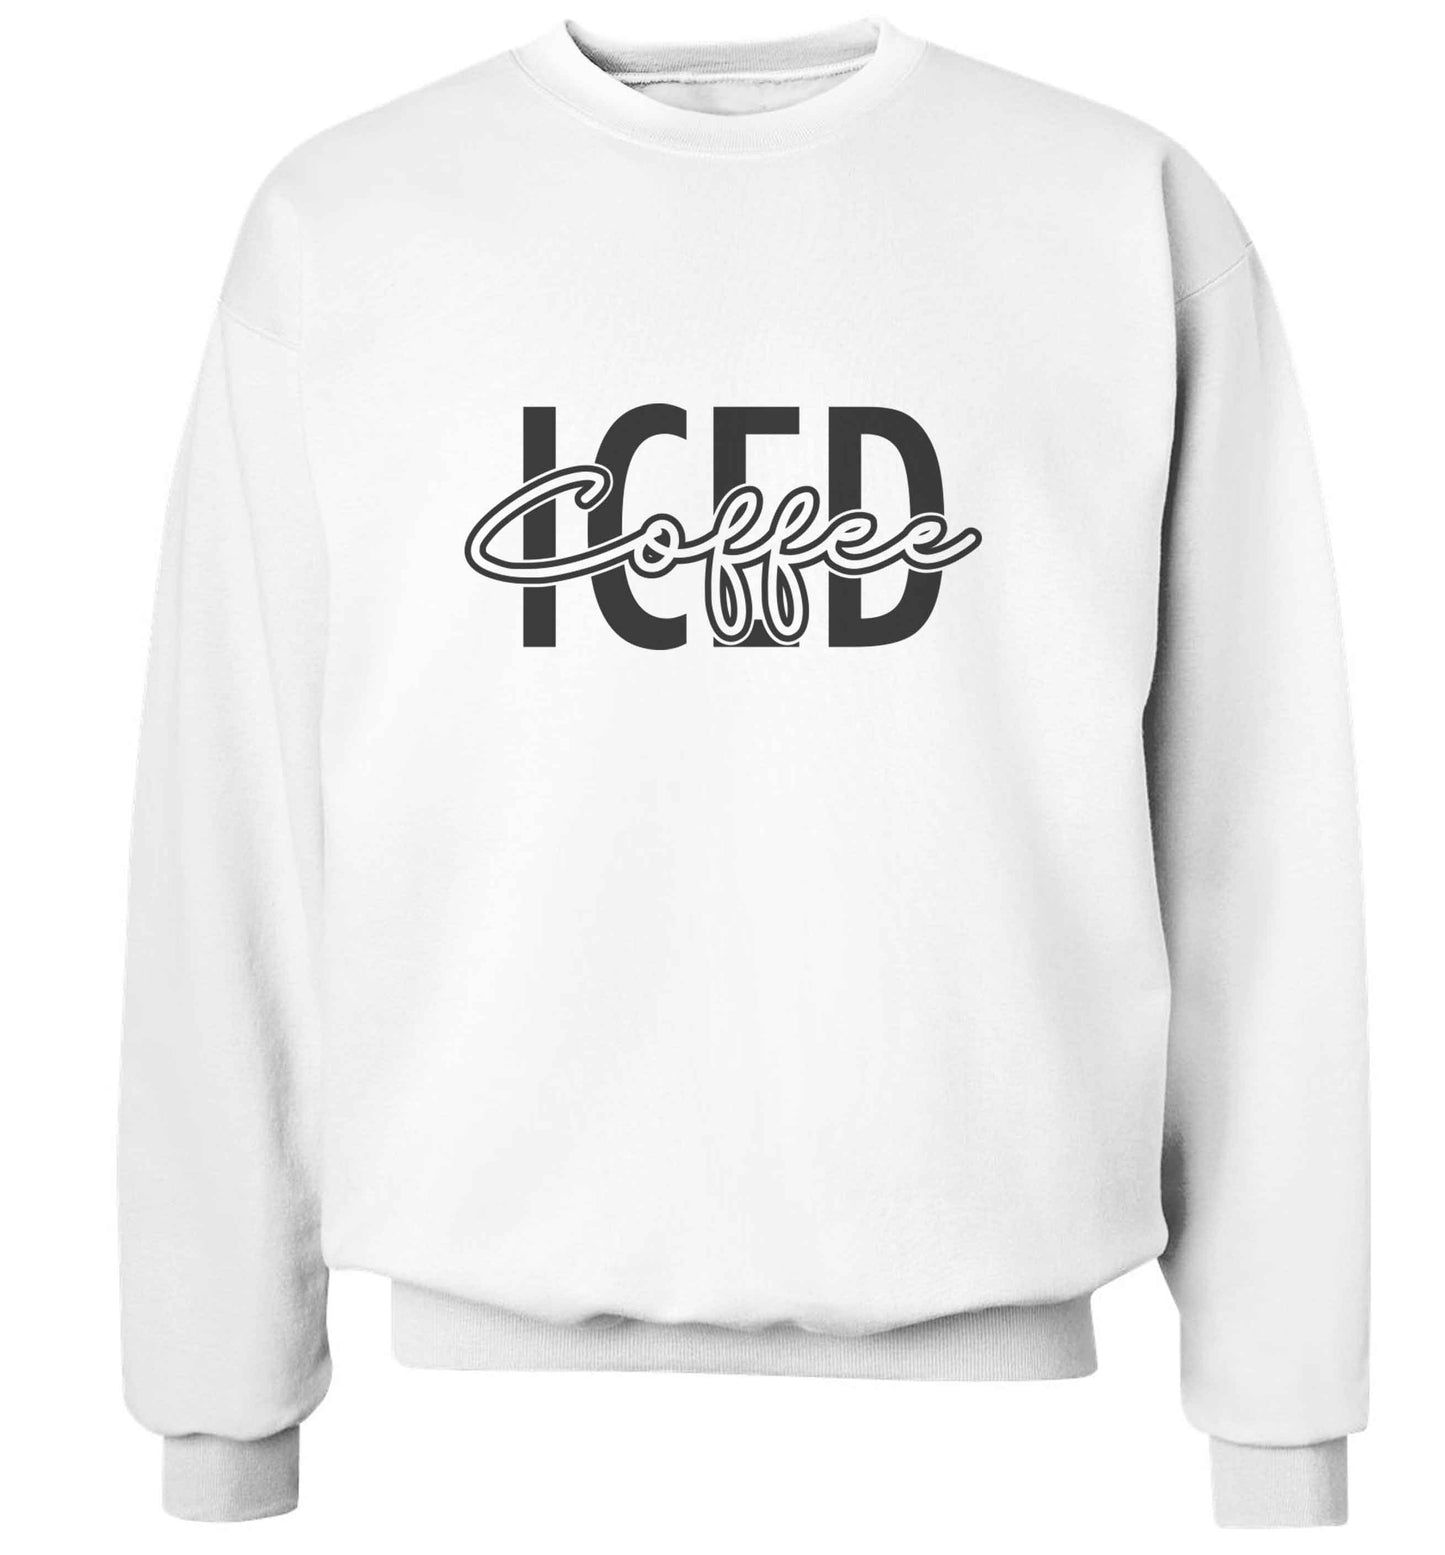 Iced Coffee adult's unisex white sweater 2XL